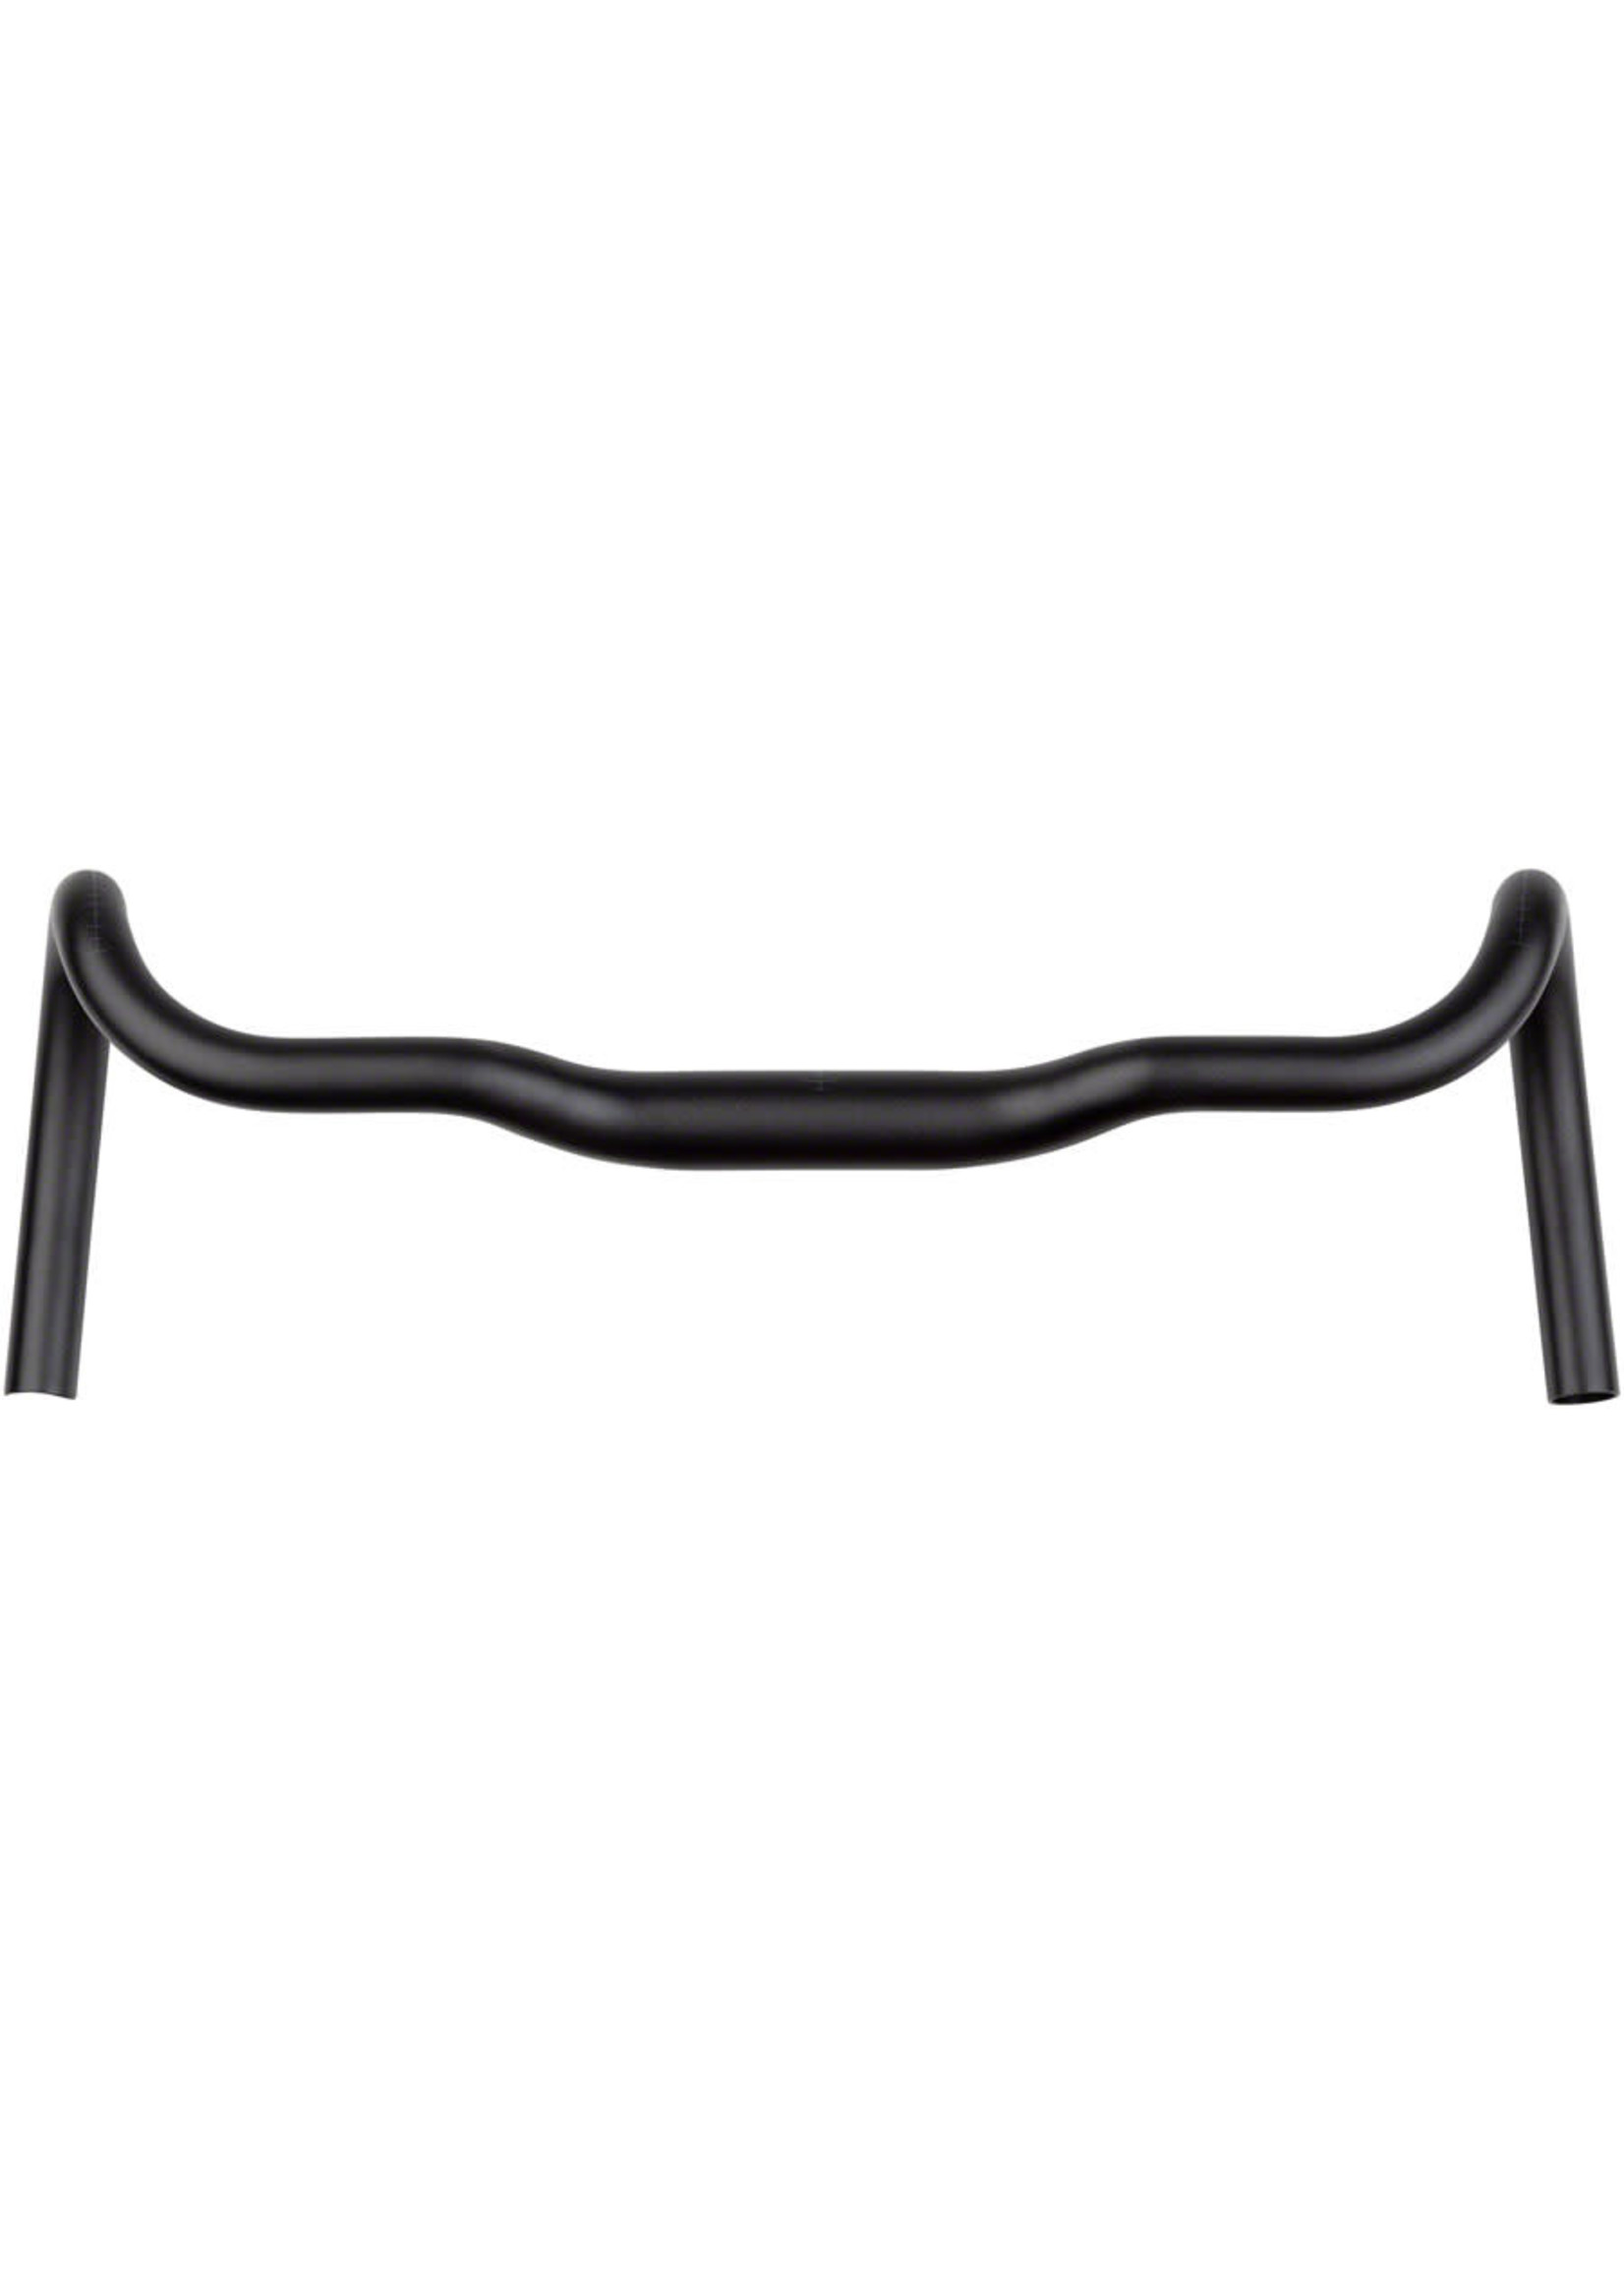 Surly Guidon Surly Truck Stop Bar, 42 cm